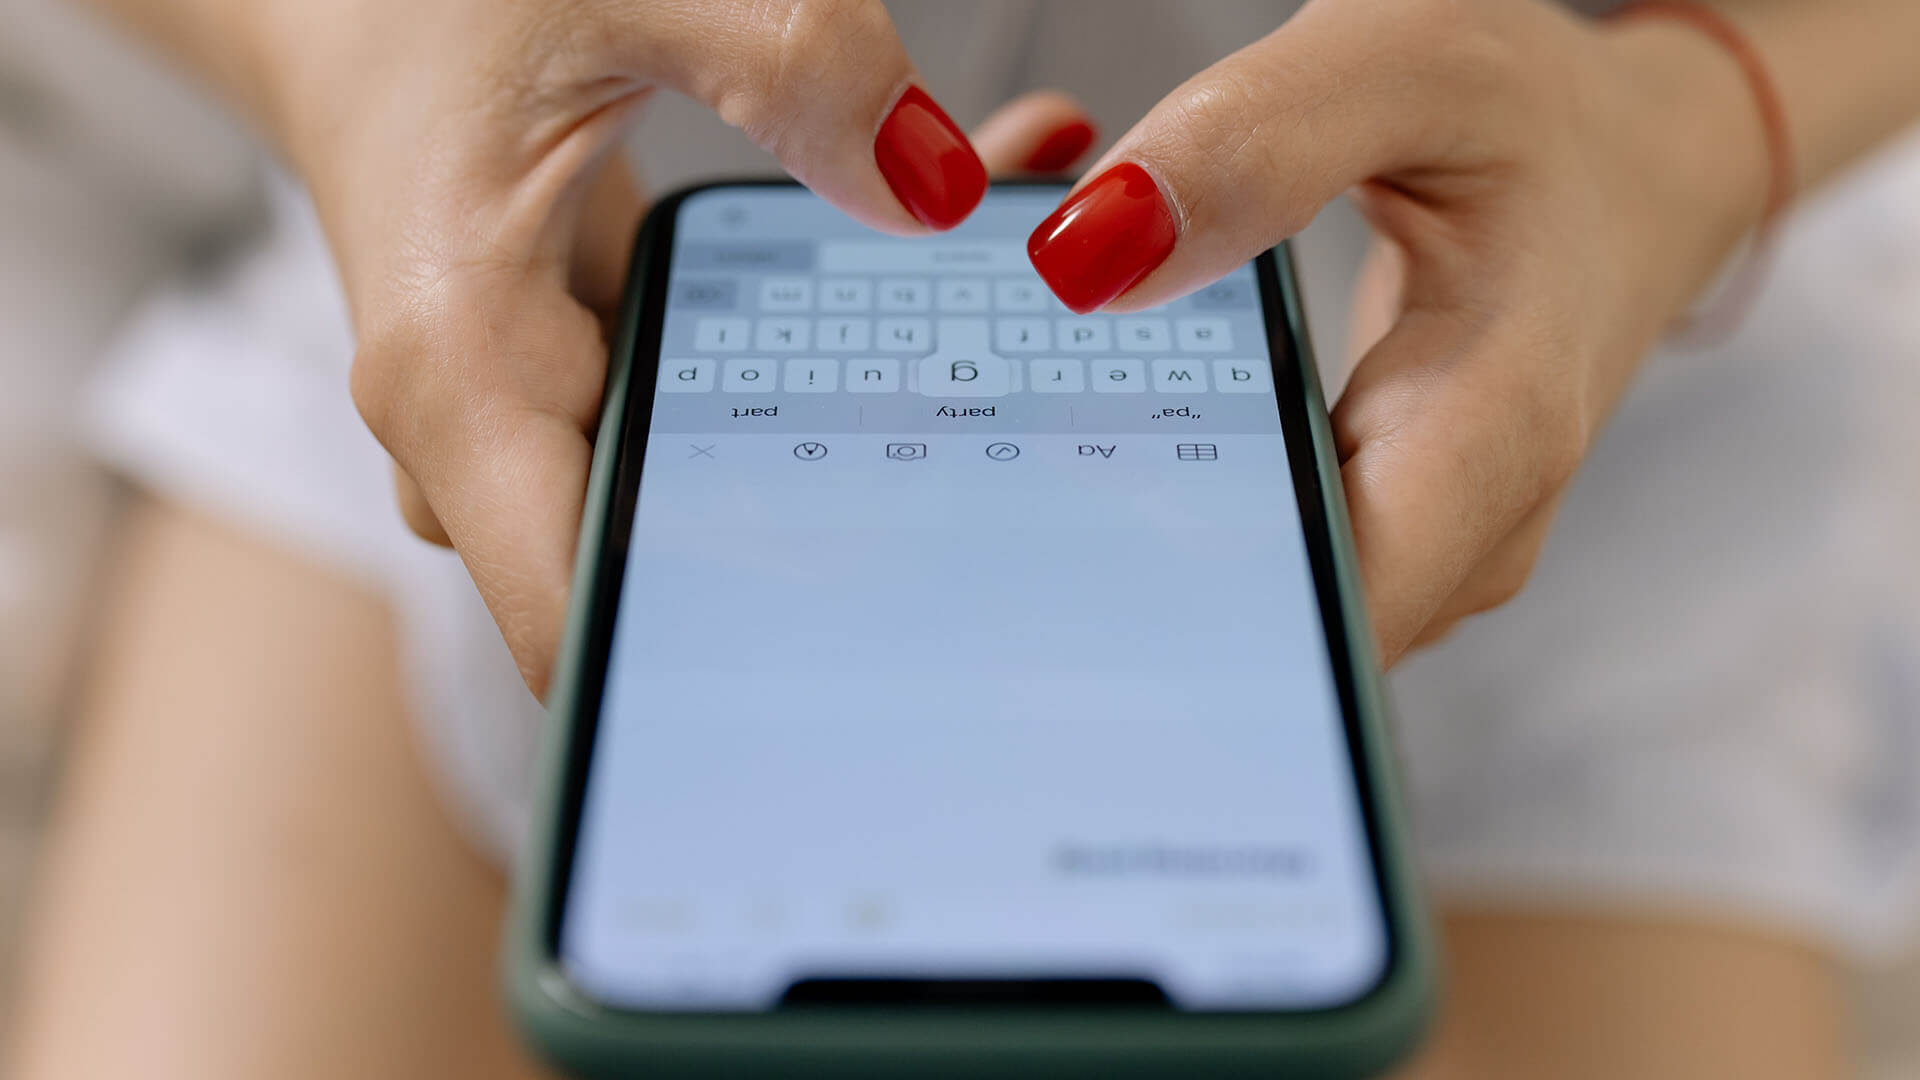 hands of a woman with red nails typing on a smartphone